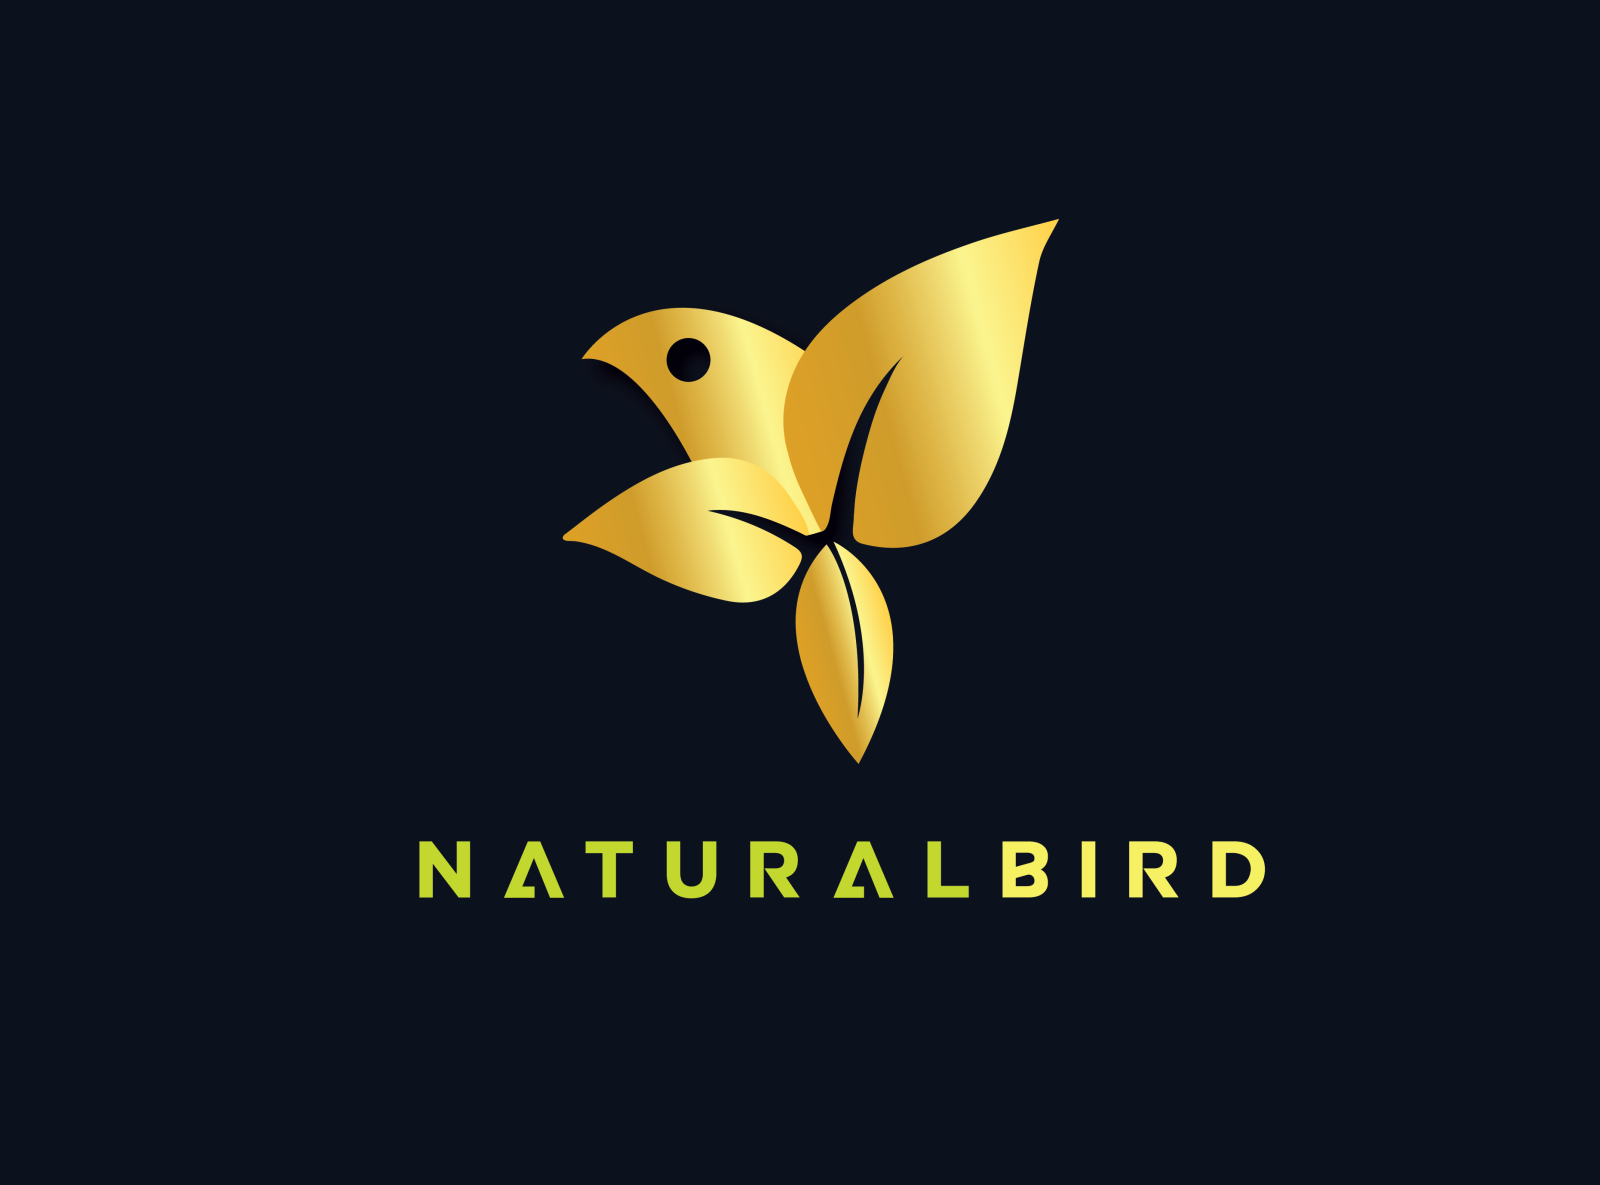 NATURAL BIRD LOGO by jrgraphic_hunt on Dribbble